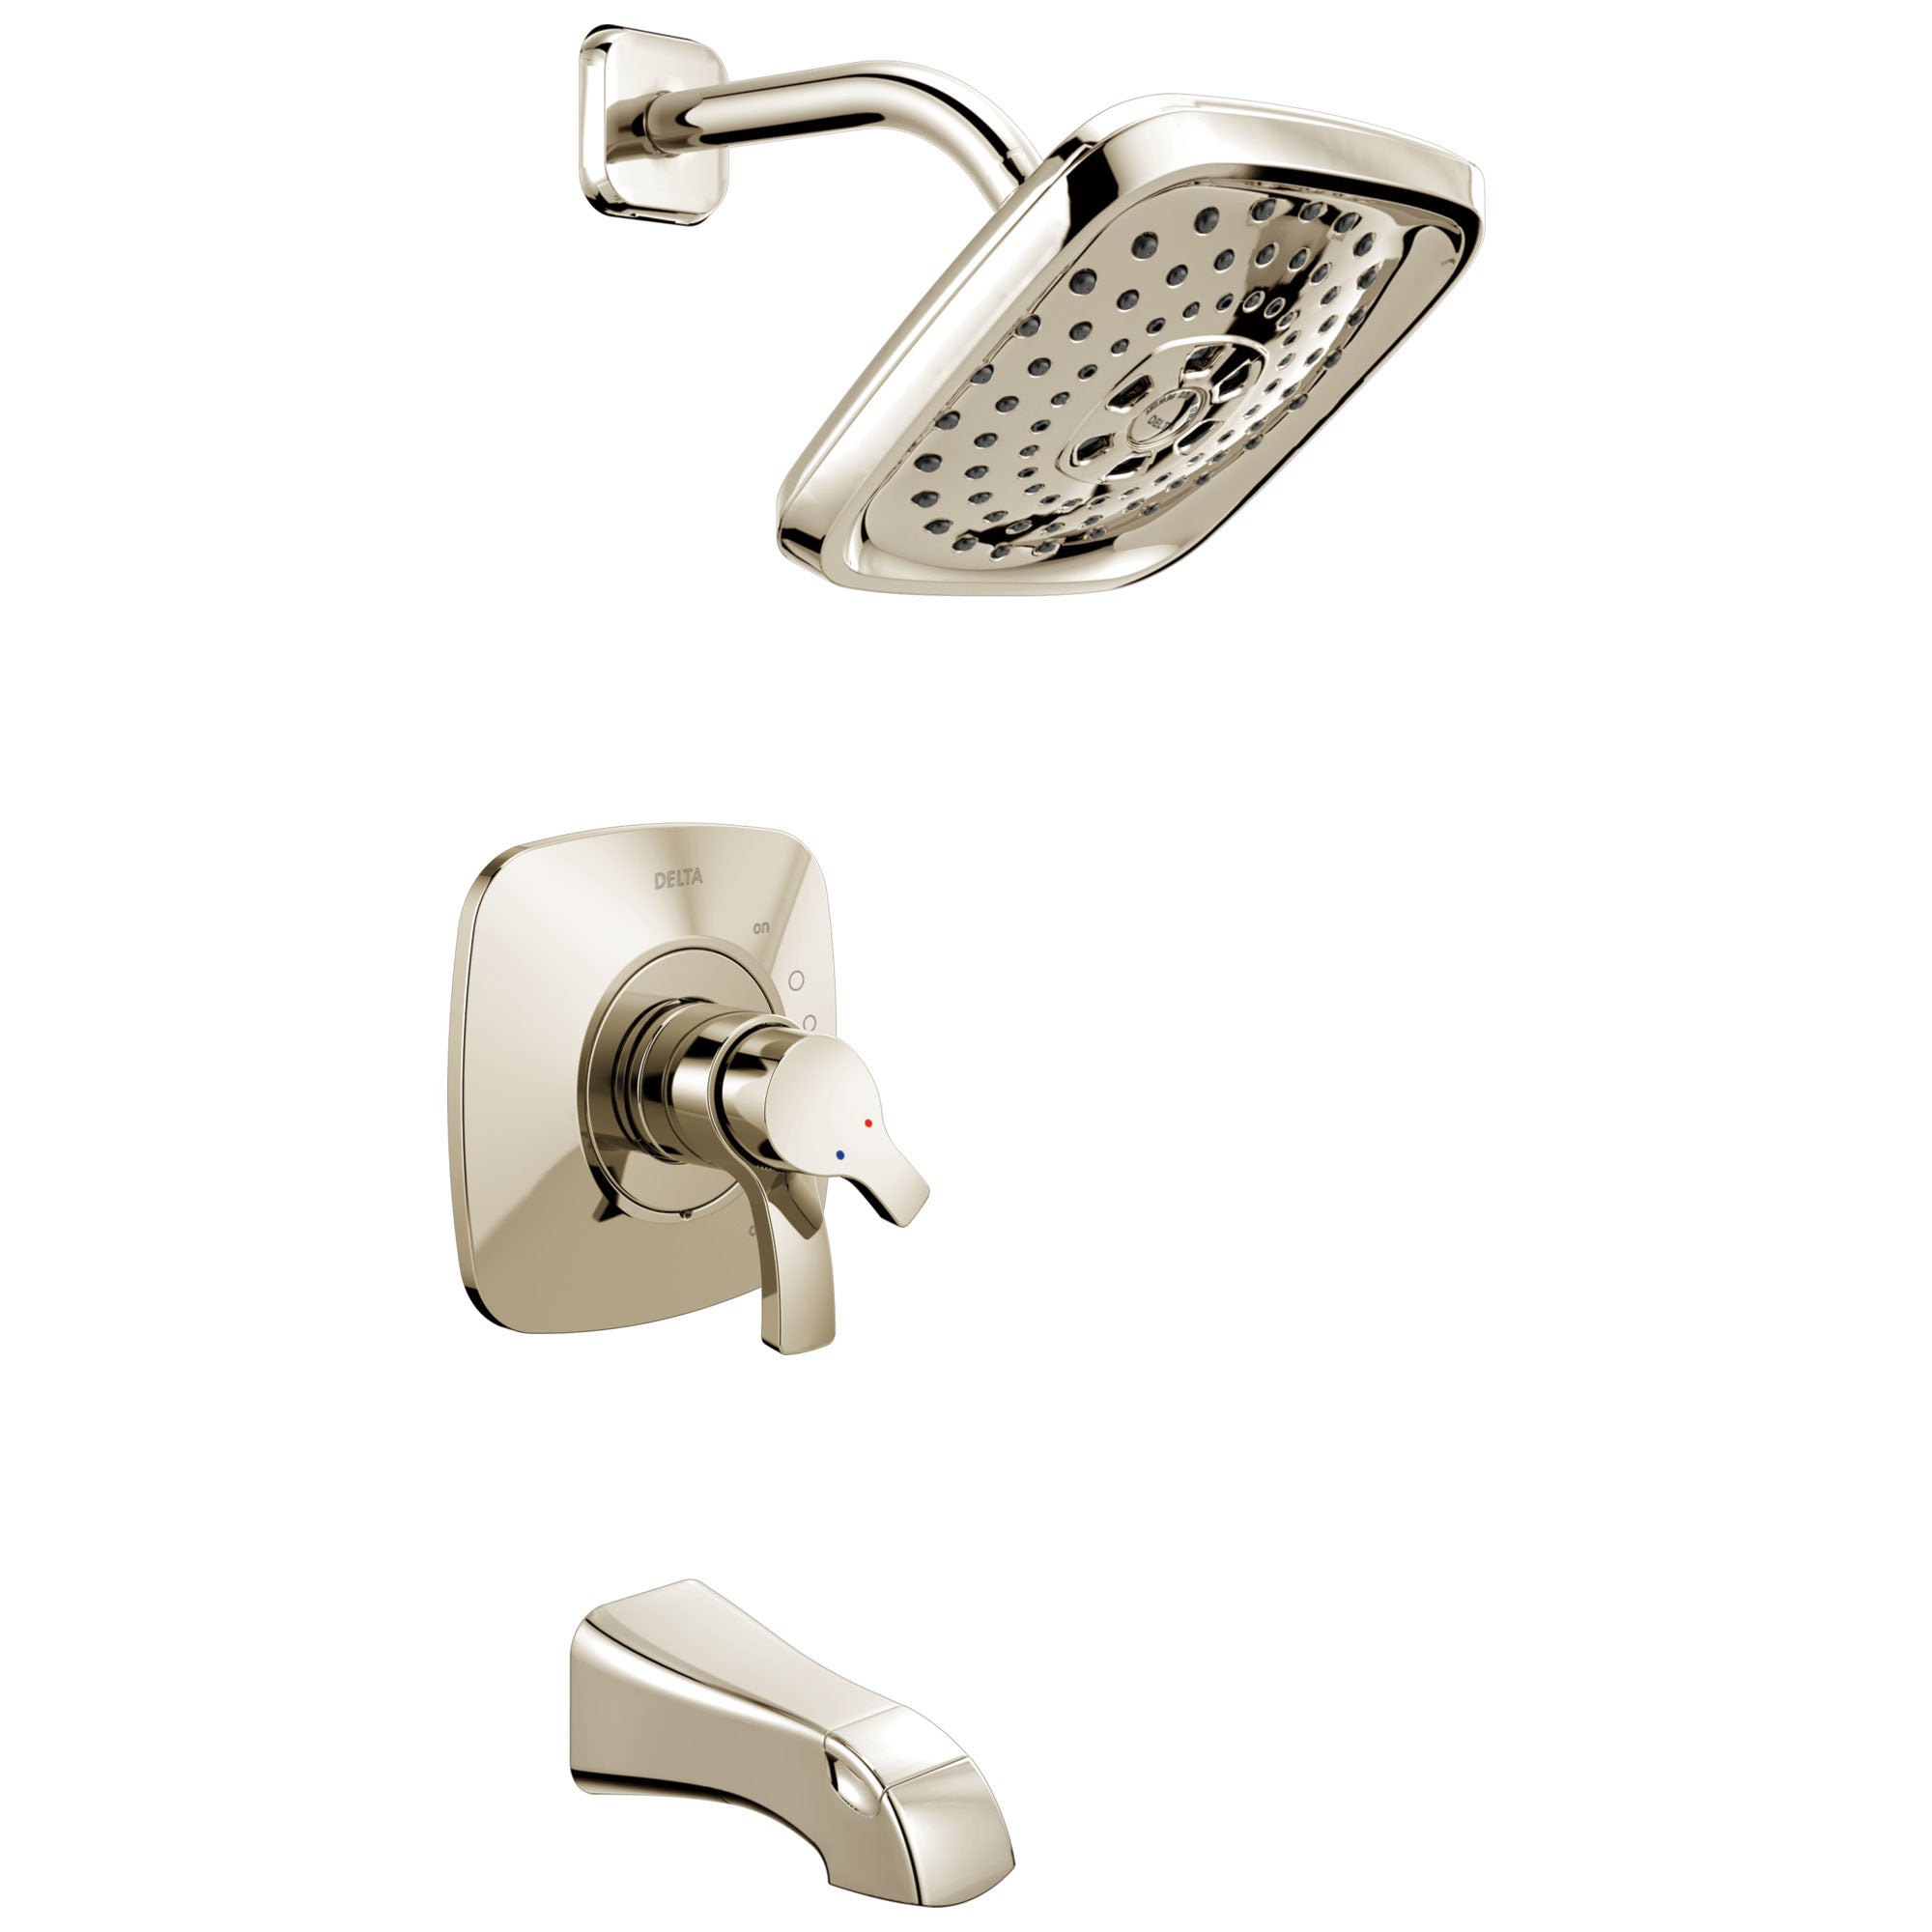 Delta Tesla Collection Polished Nickel Modern Dual Pressure and Temperature Control Tub and Shower Combination Faucet Includes Valve without Stops D1962V